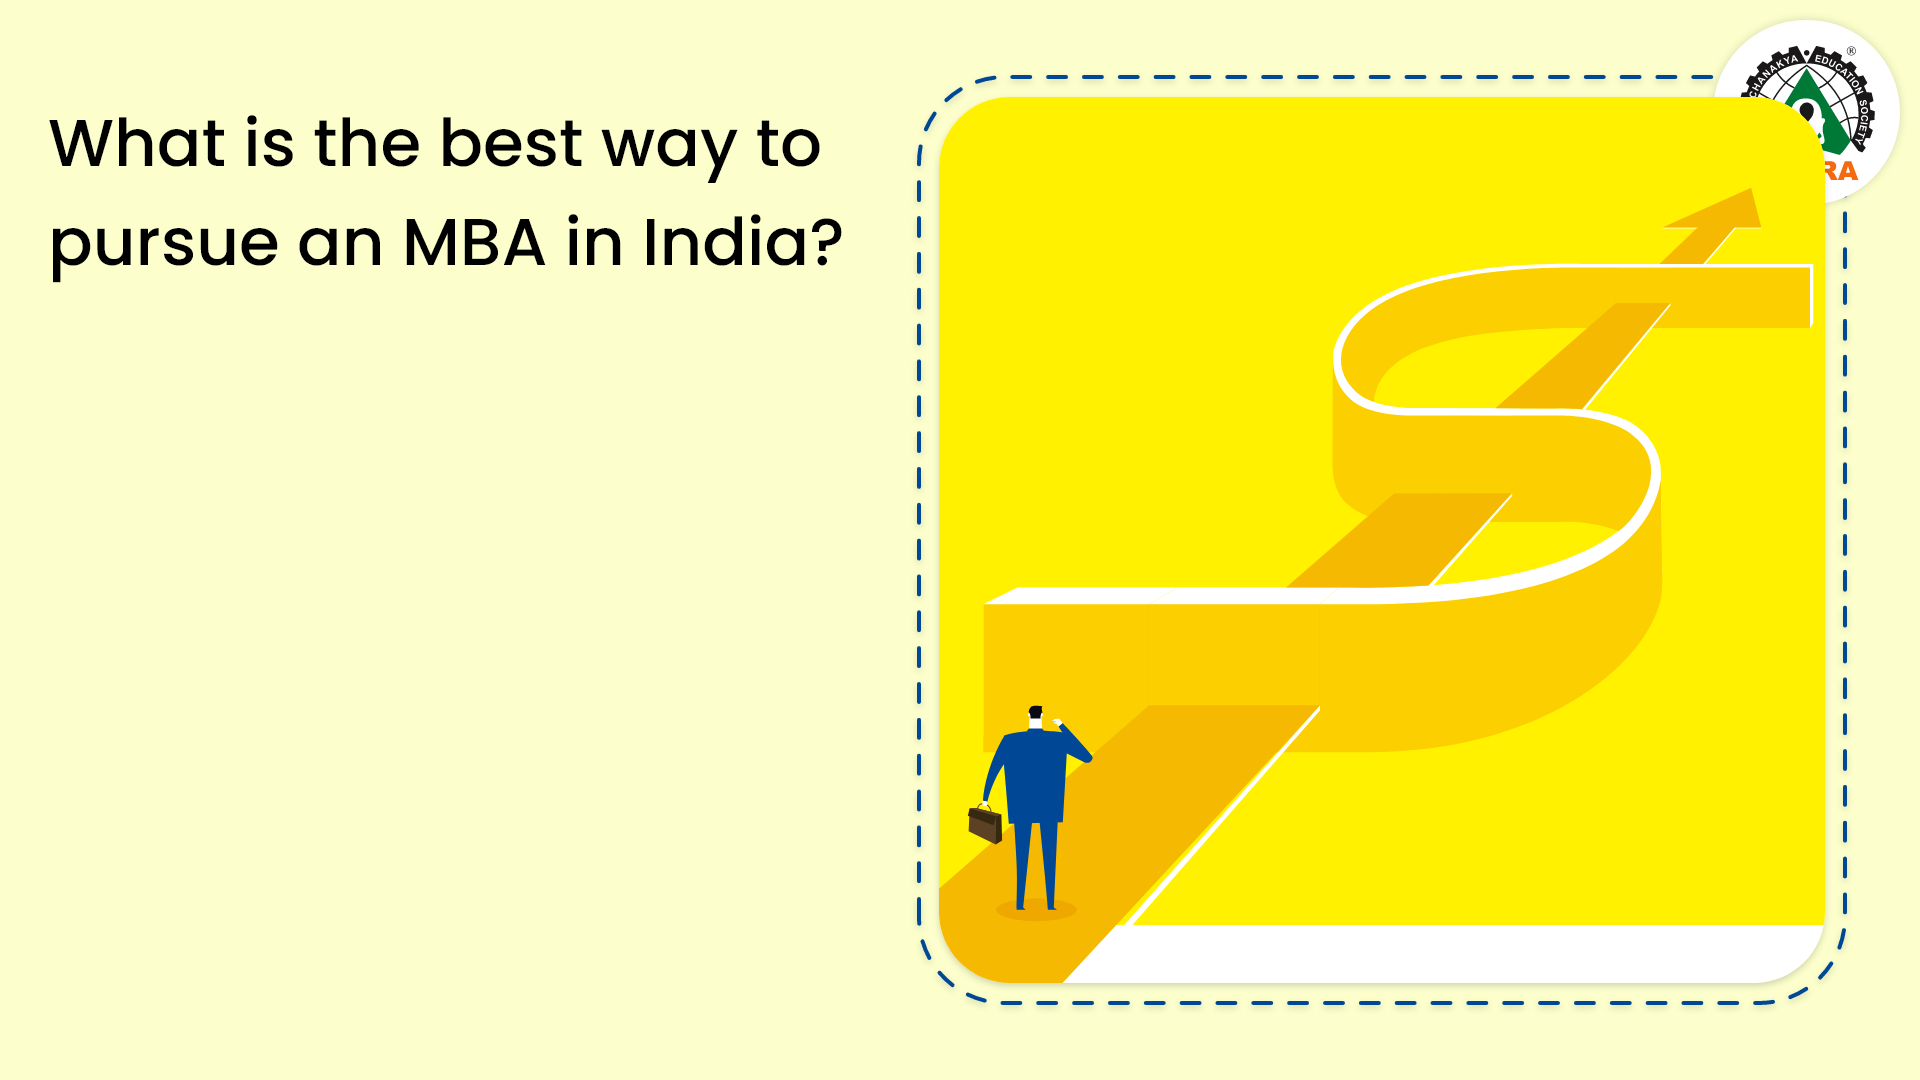 What is the best way to pursue an MBA in India?